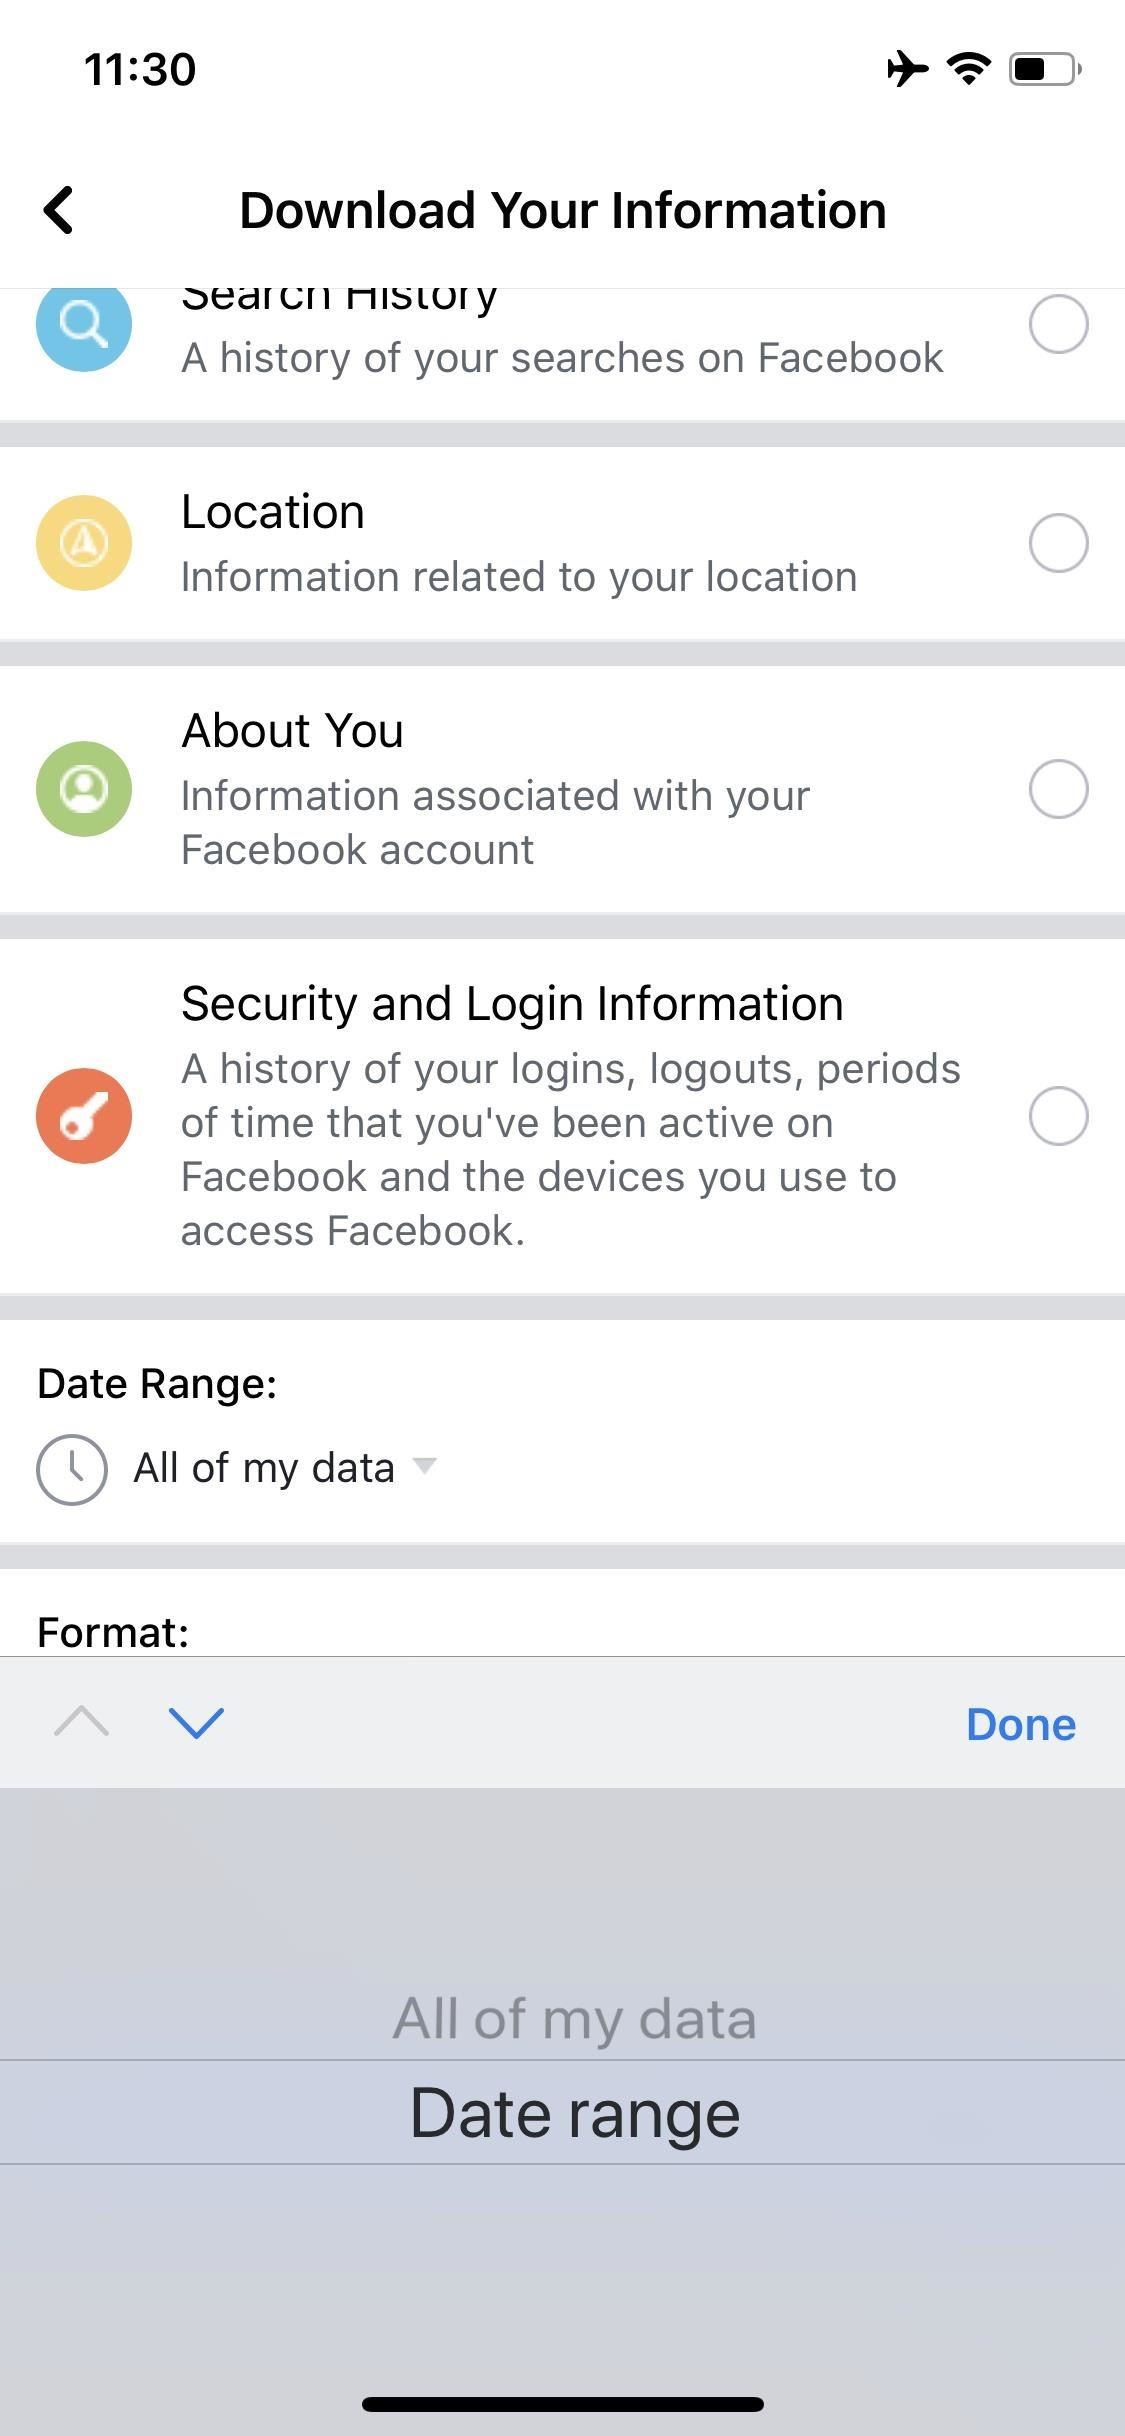 Apps & Websites Send Your Activity to Facebook — Here's How to View, Manage & Delete It